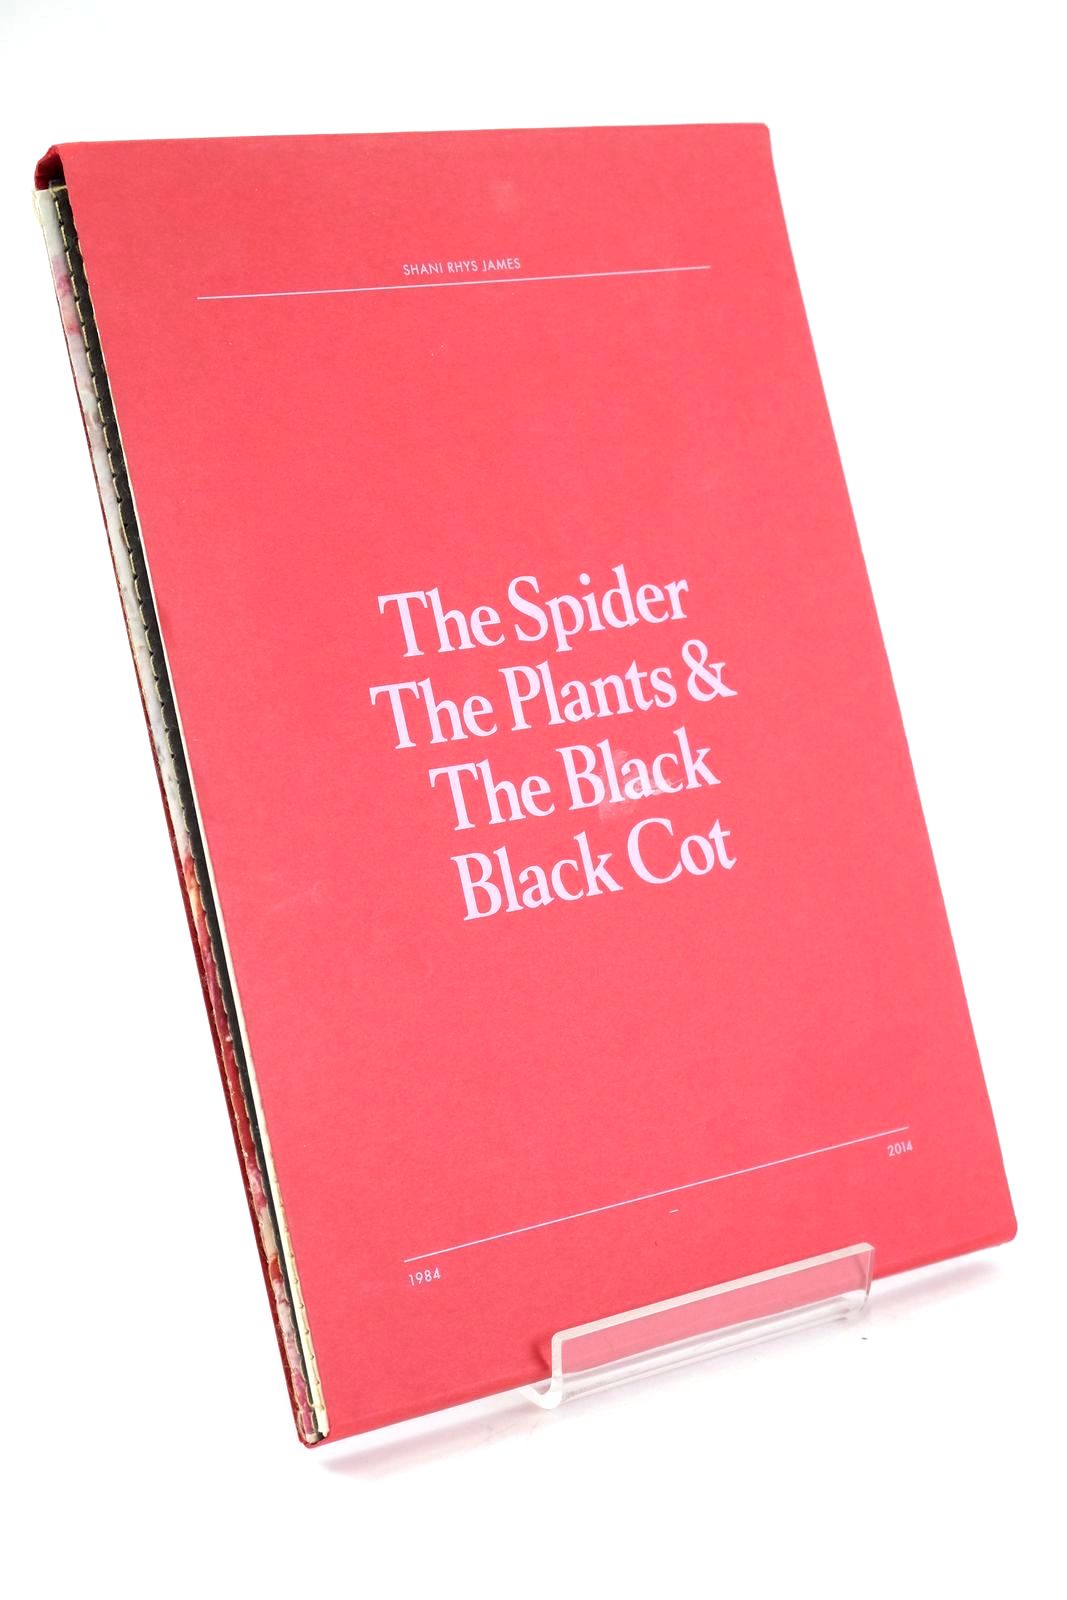 Photo of THE SPIDER THE PLANTS &amp; THE BLACK BLACK COT written by Smith, Dai Bala, Iwan Rhydderch, Francesca Lord, Peter Geliot, Emma Briggs, Alice illustrated by James, Shani Rhys published by Dolpebyll Studio Press (STOCK CODE: 1324825)  for sale by Stella & Rose's Books